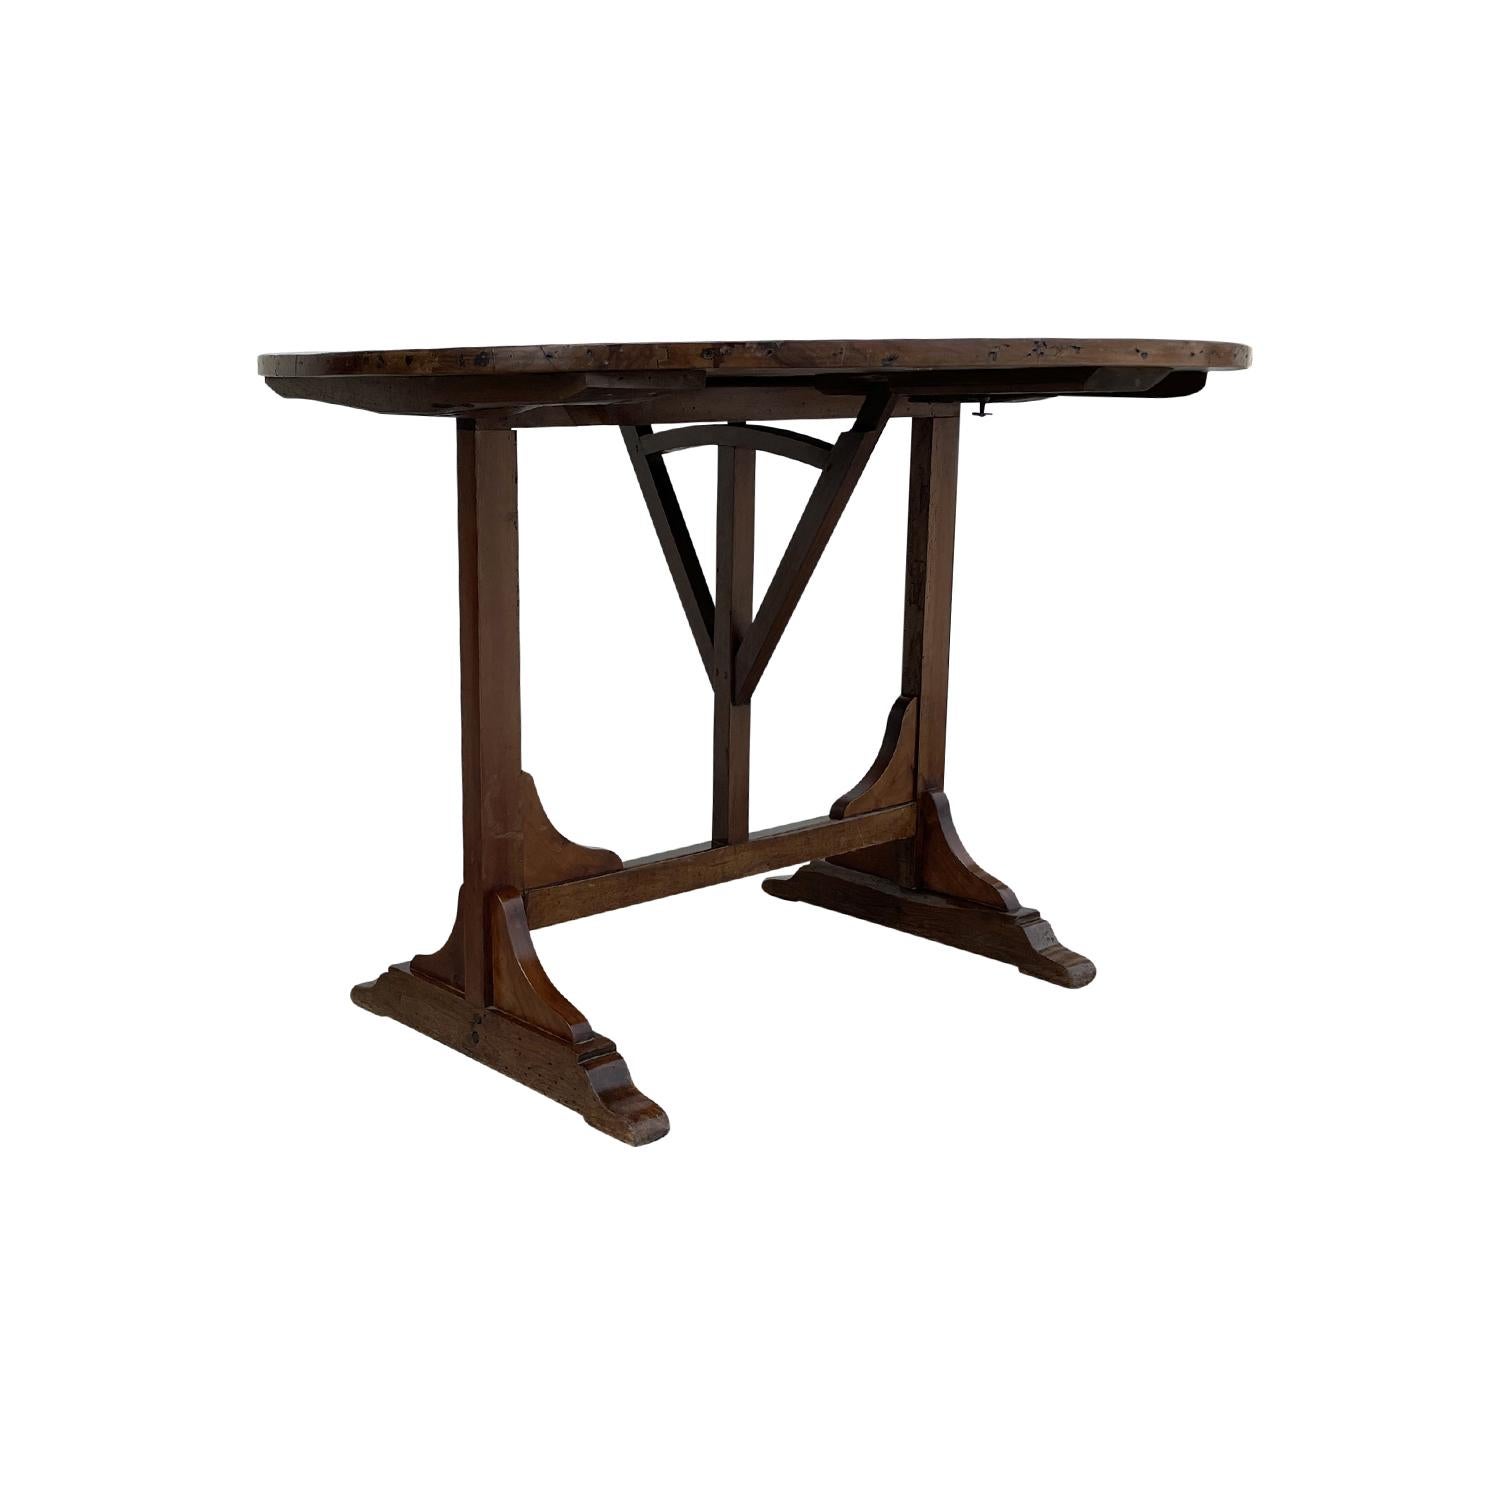 Hand-Carved 19th Century French Provencal Walnut Folding Wine Table - Antique Center Table For Sale